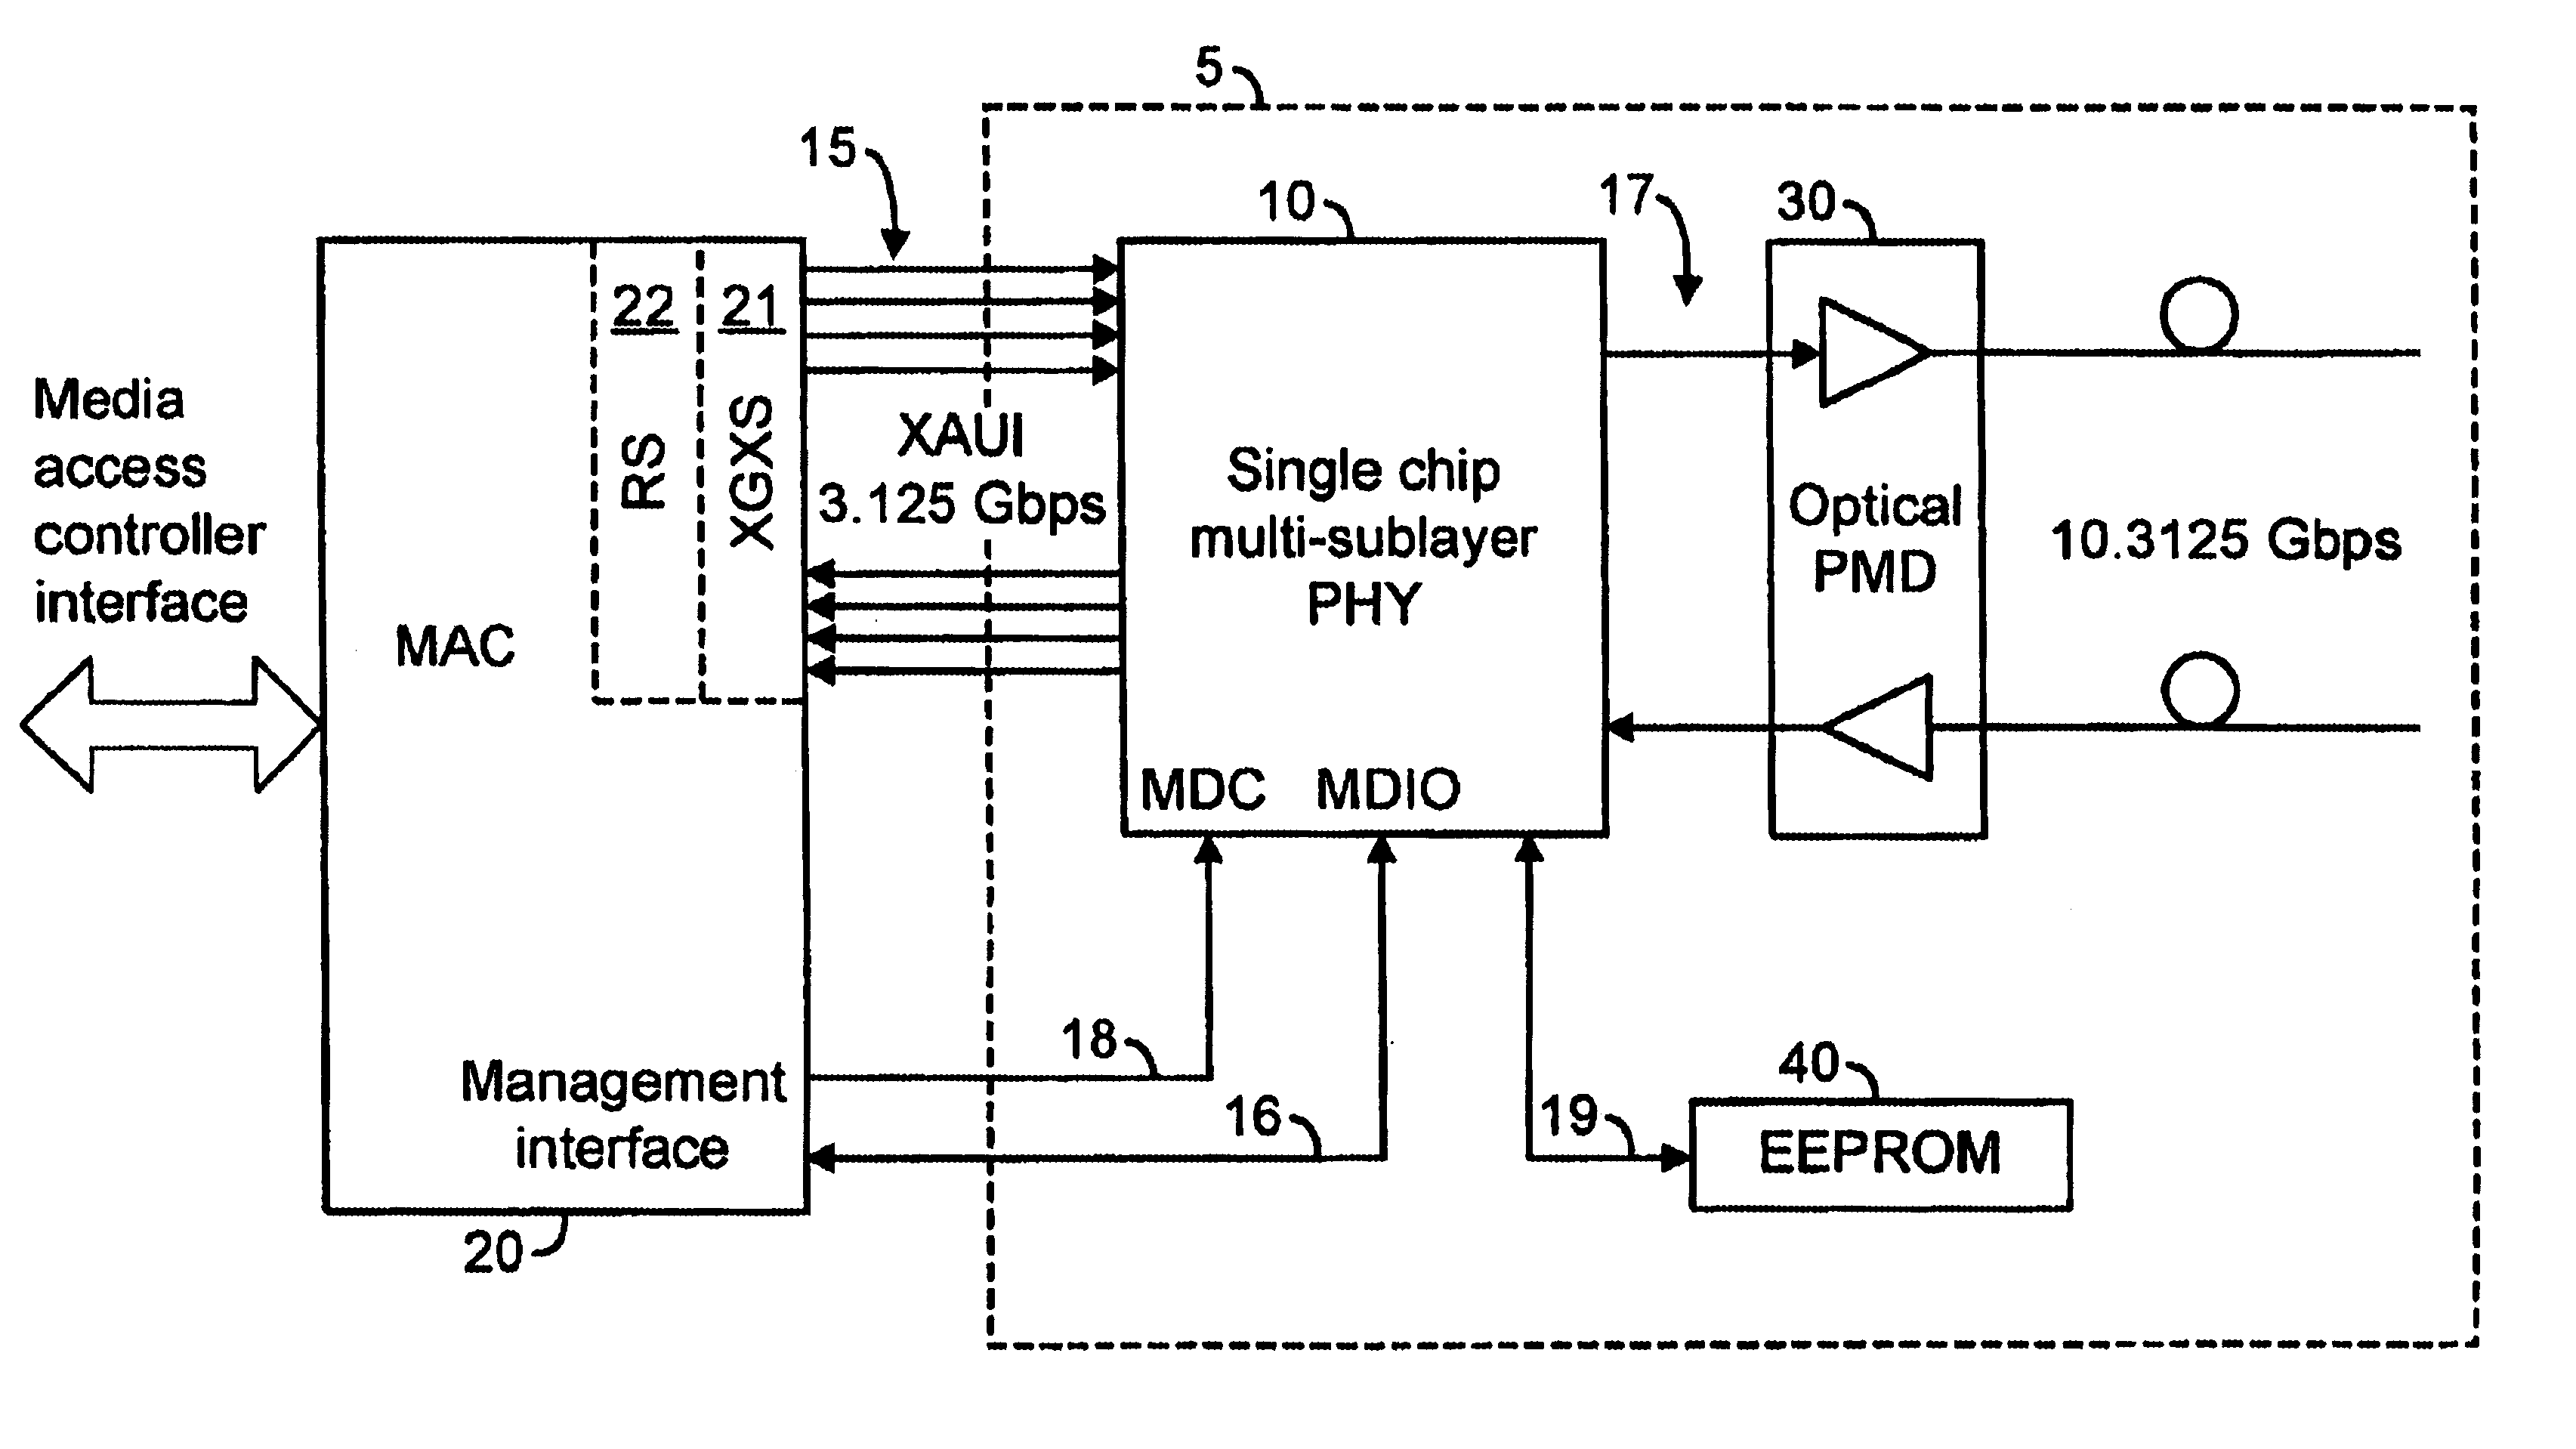 Transceiver having shadow memory facilitating on-transceiver collection and communication of local parameters